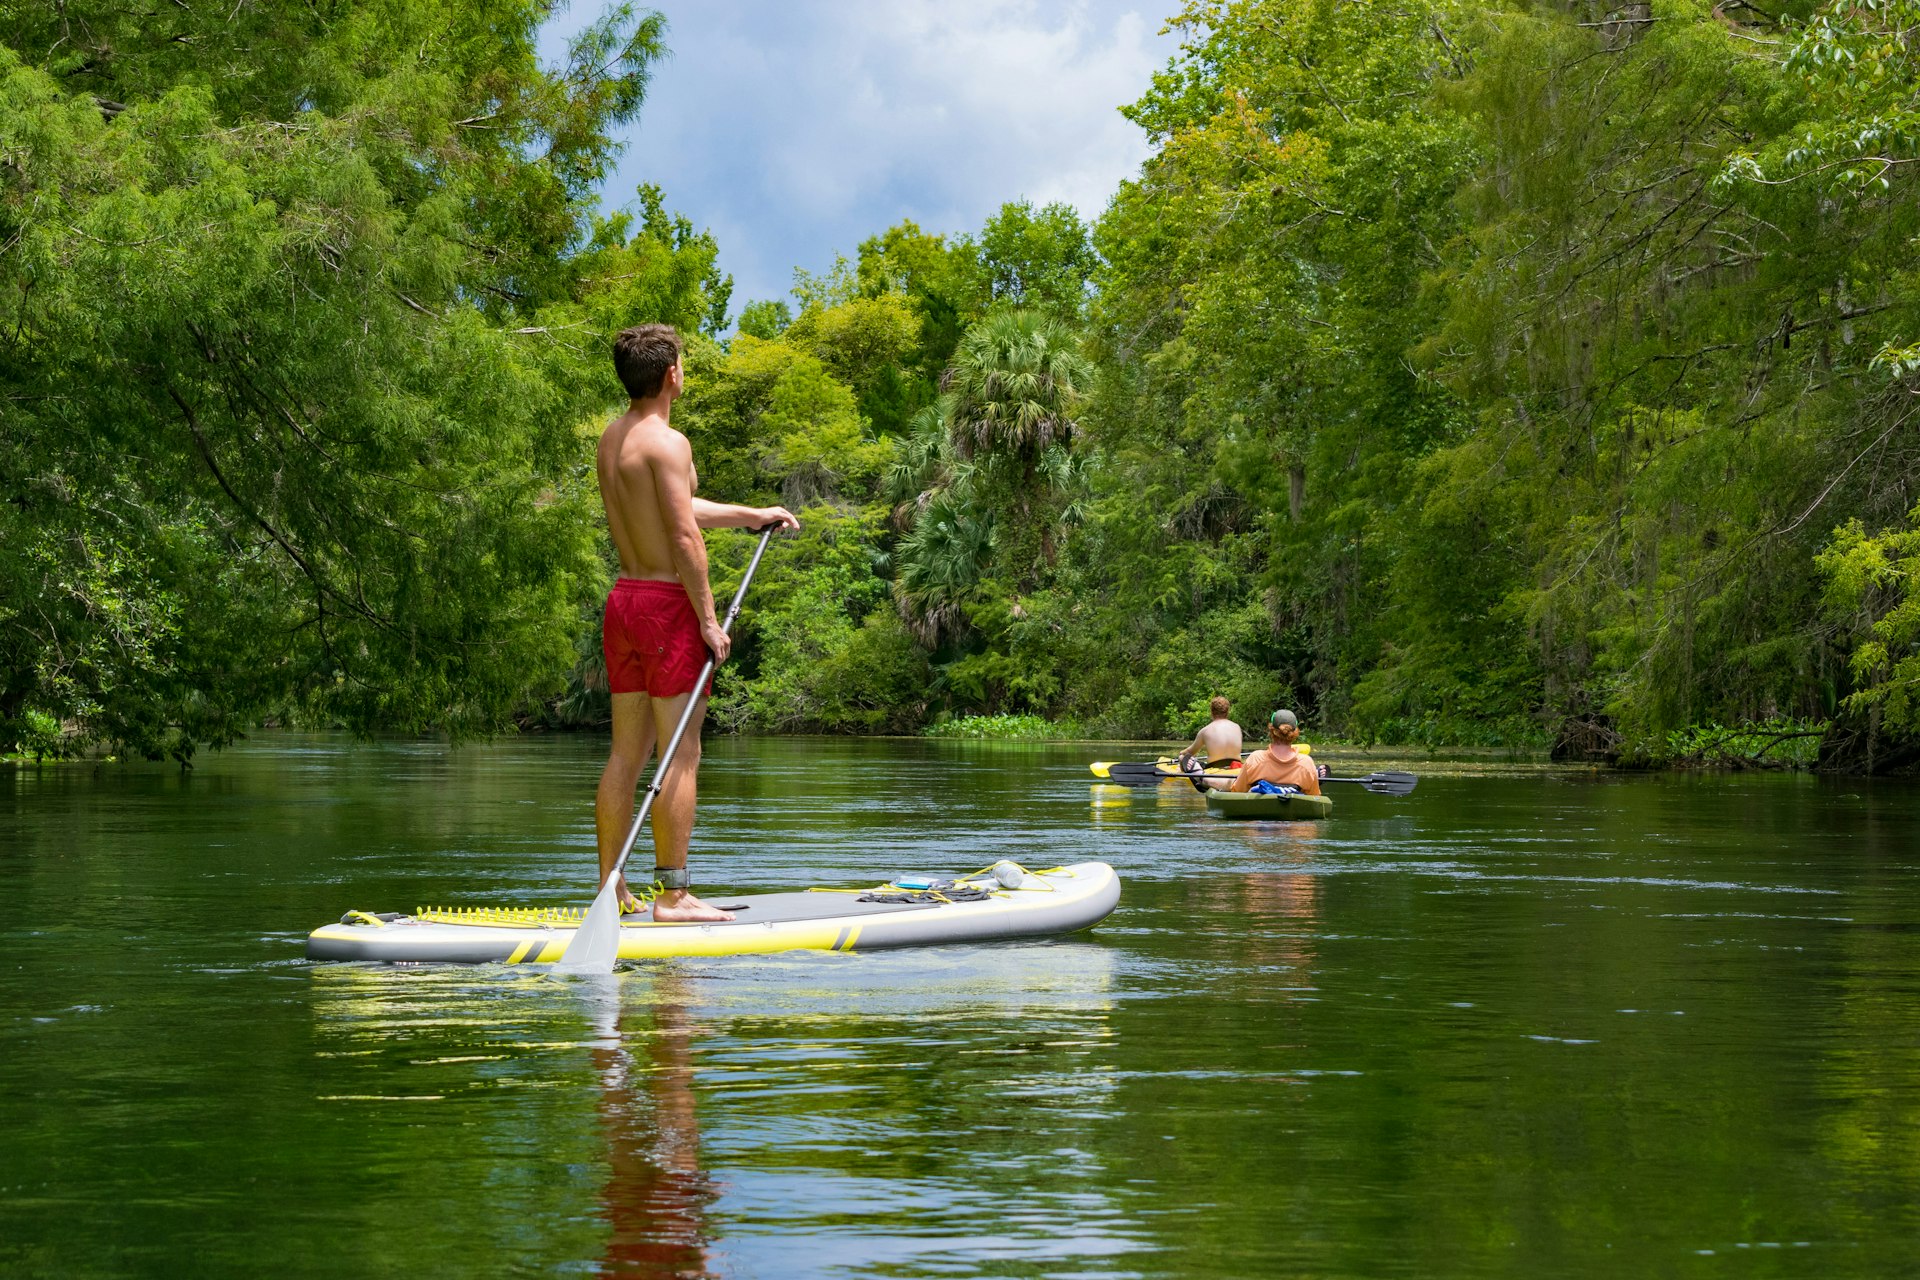 A male standup paddleboarder and two kayakers go down a river